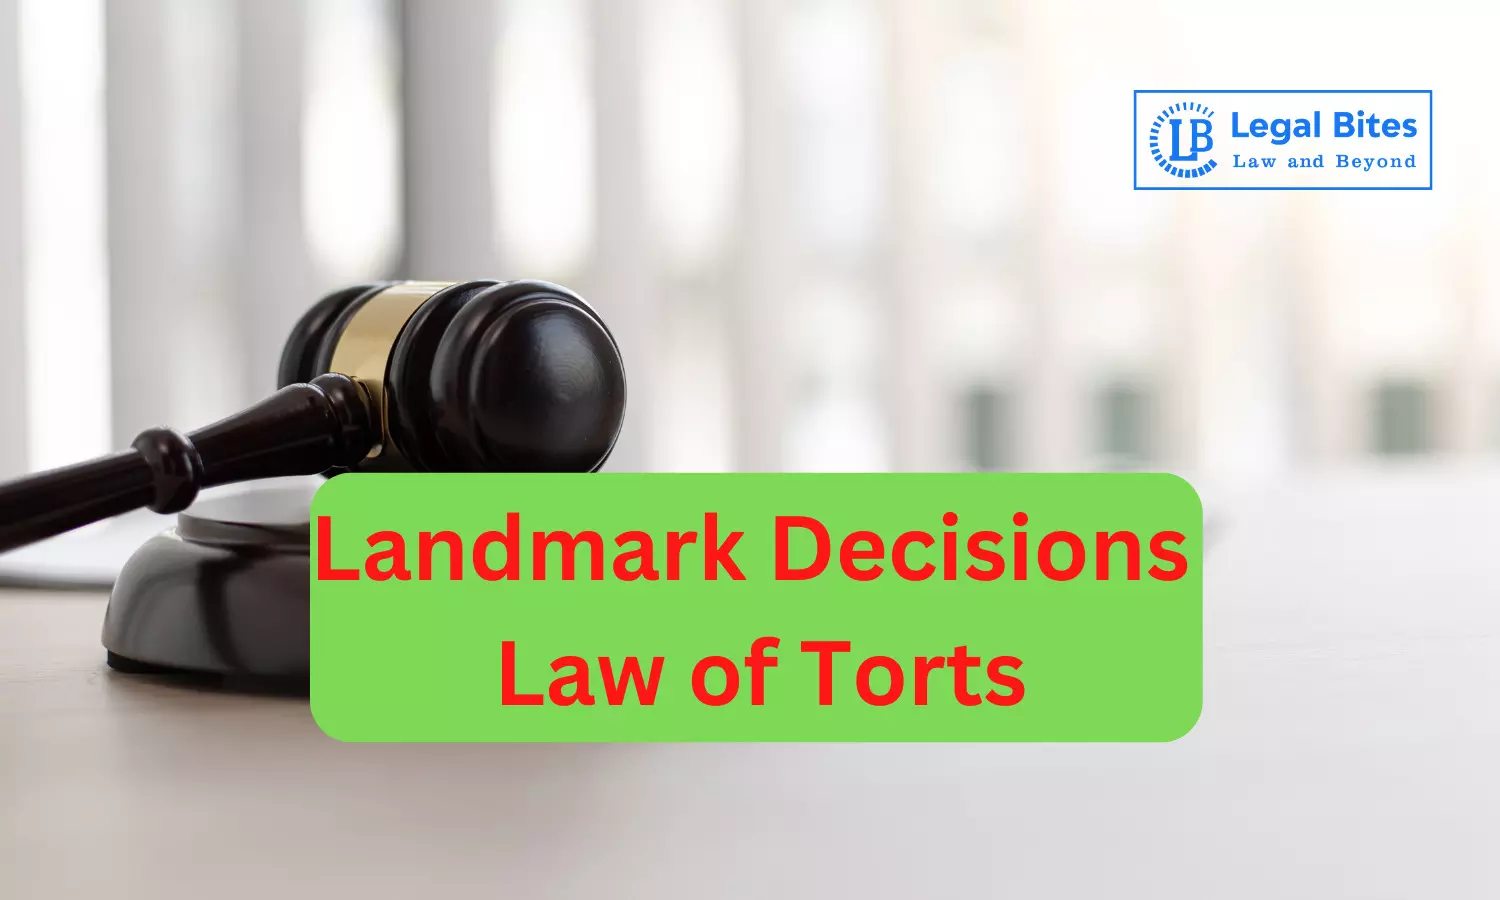 Landmark Decisions in the Law of Torts